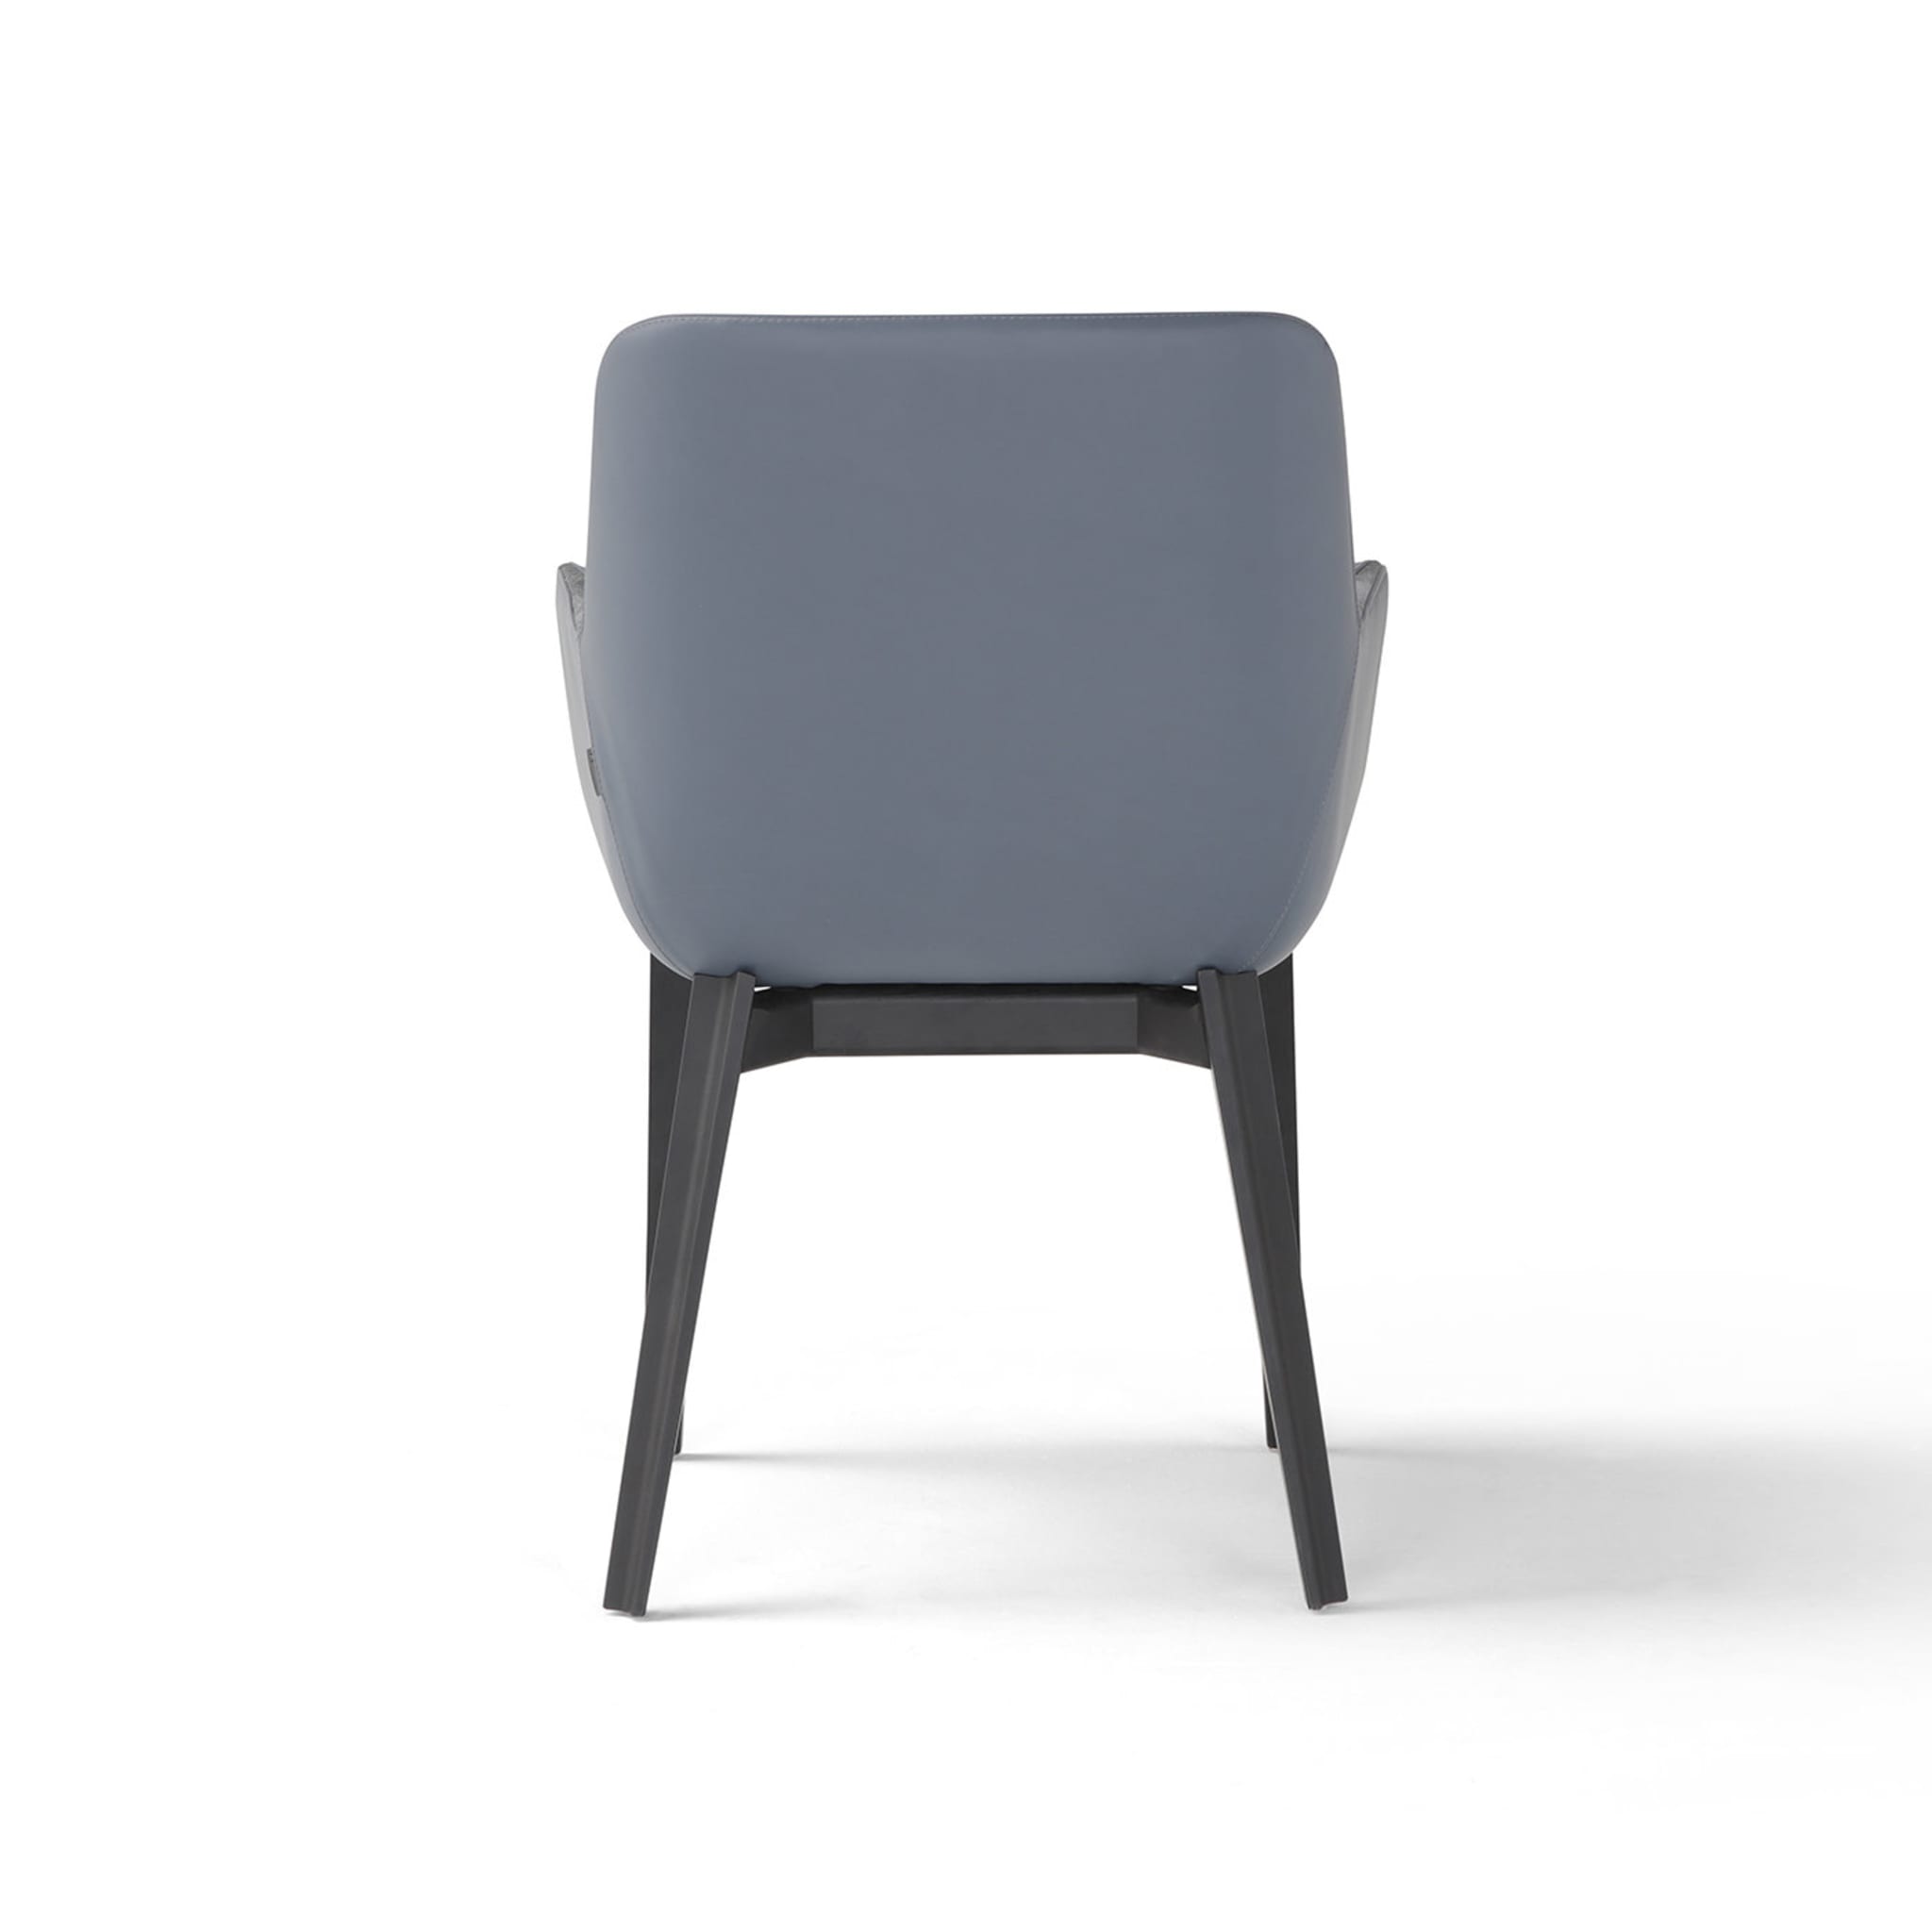 Panis Gray Leather Chair - Alternative view 3